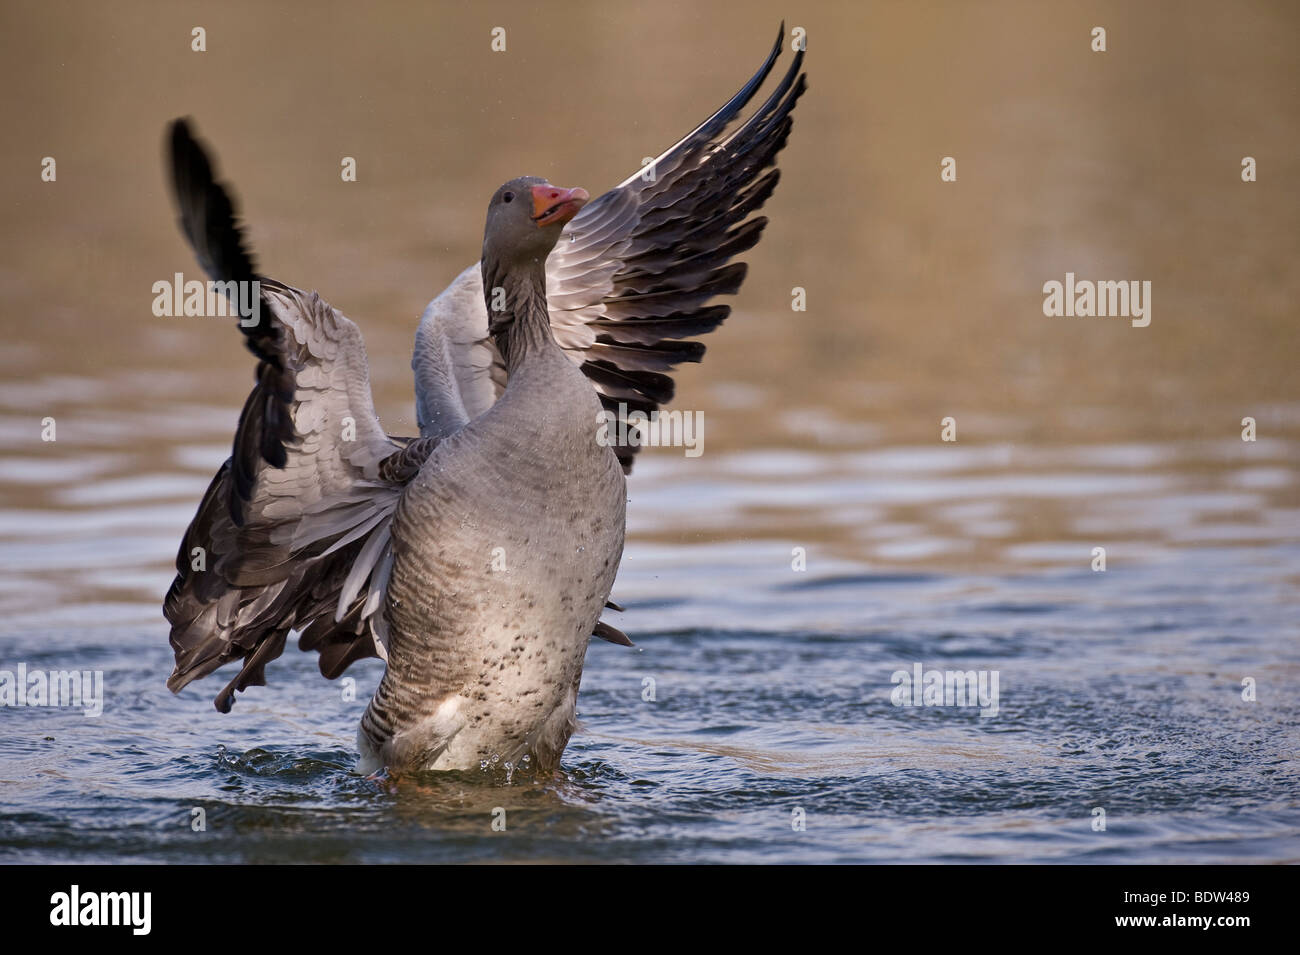 A greylag goose courting a potential partner Stock Photo